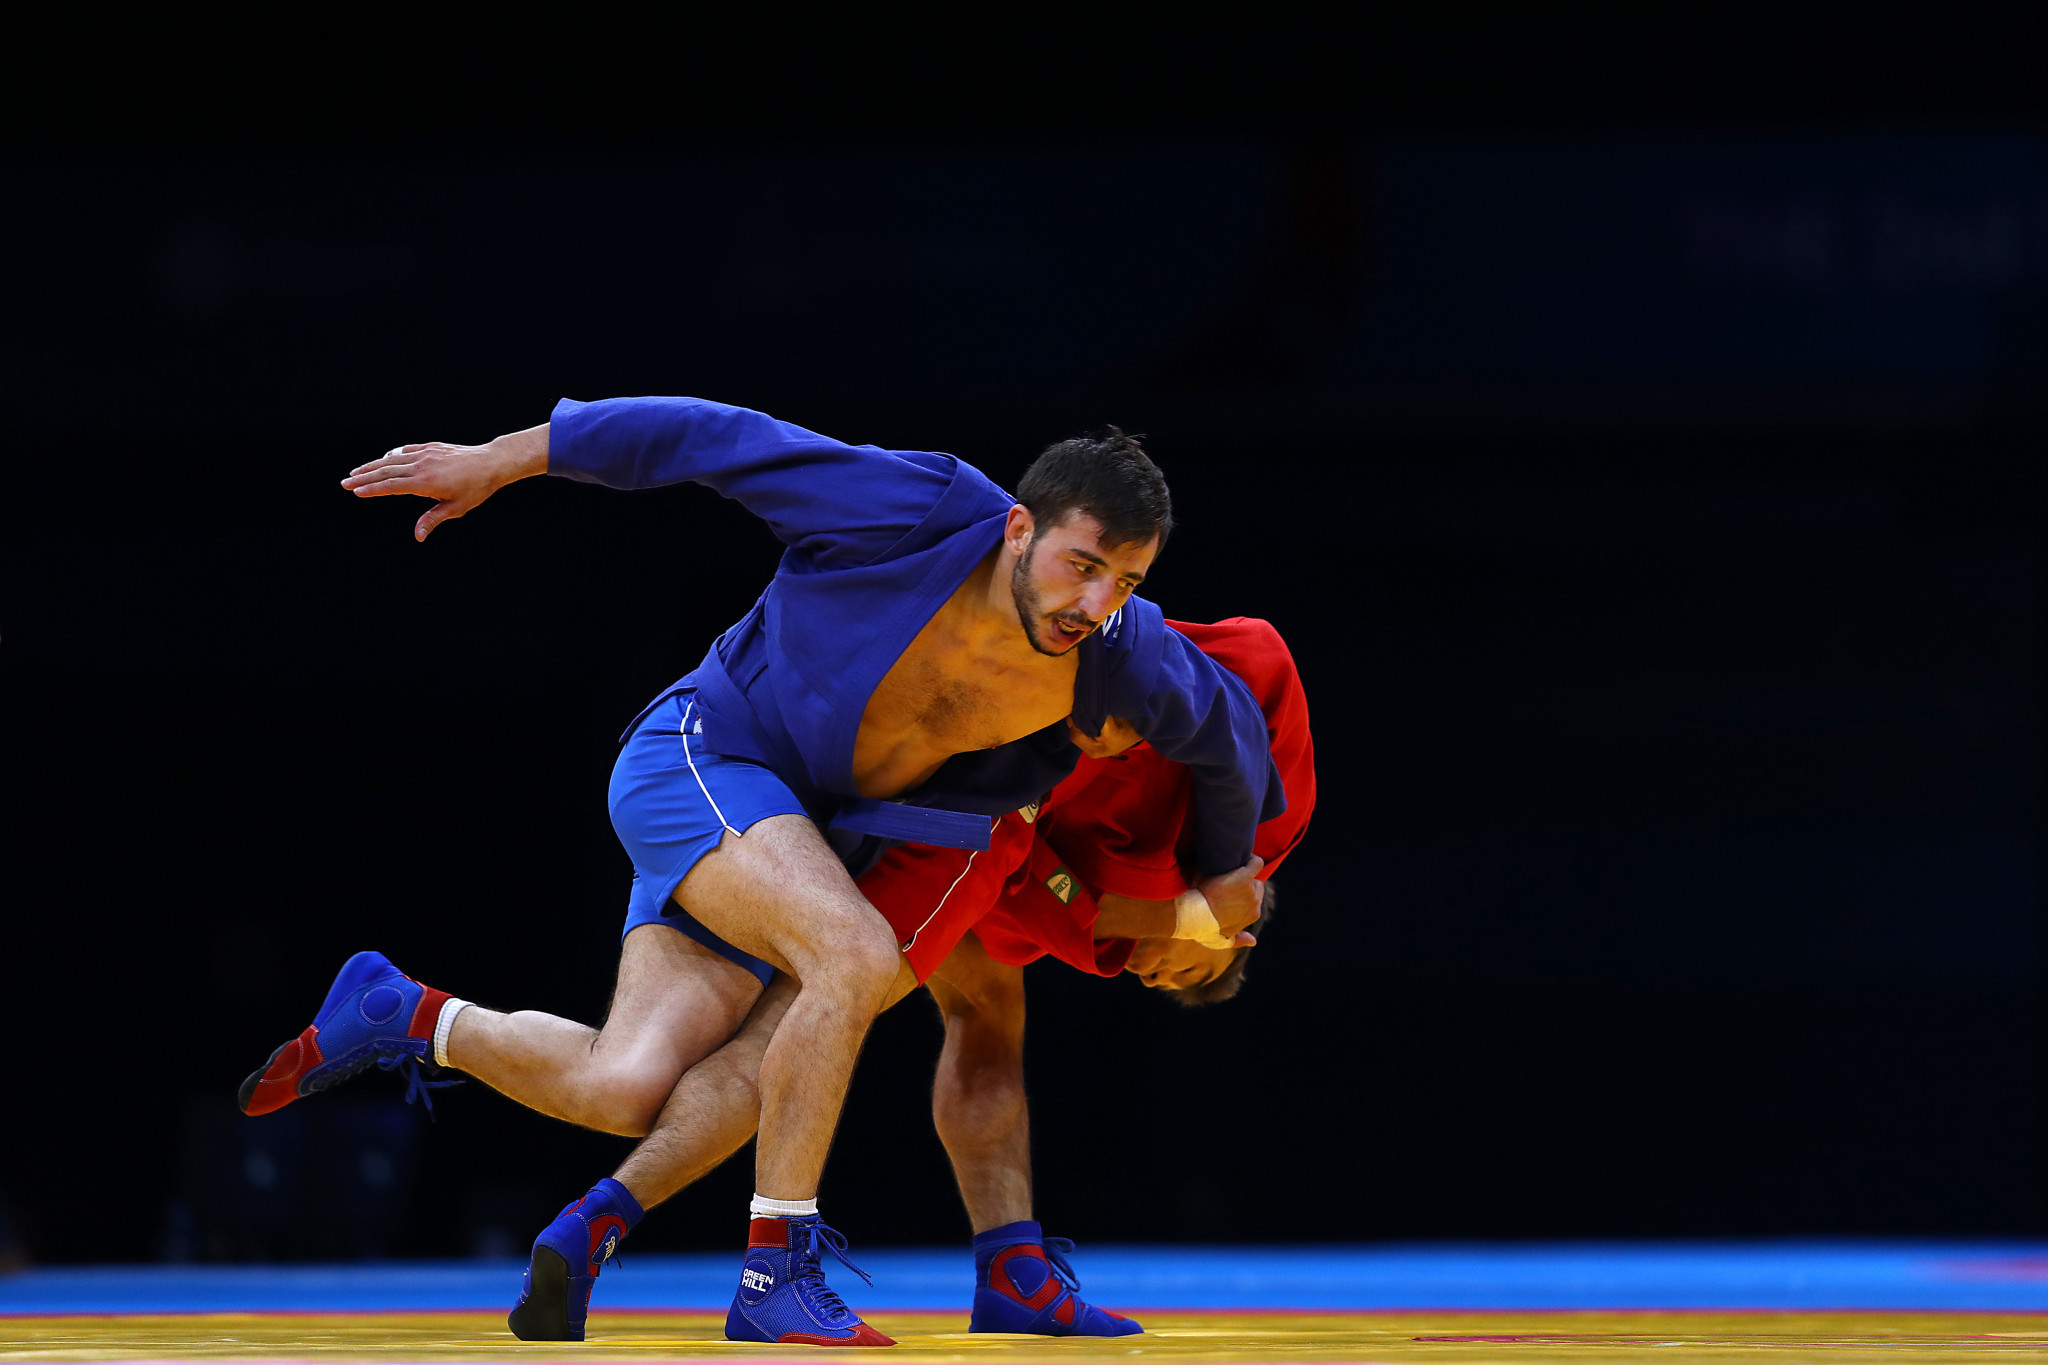 New rules have been implemented in sambo for 2020 ©Getty Images